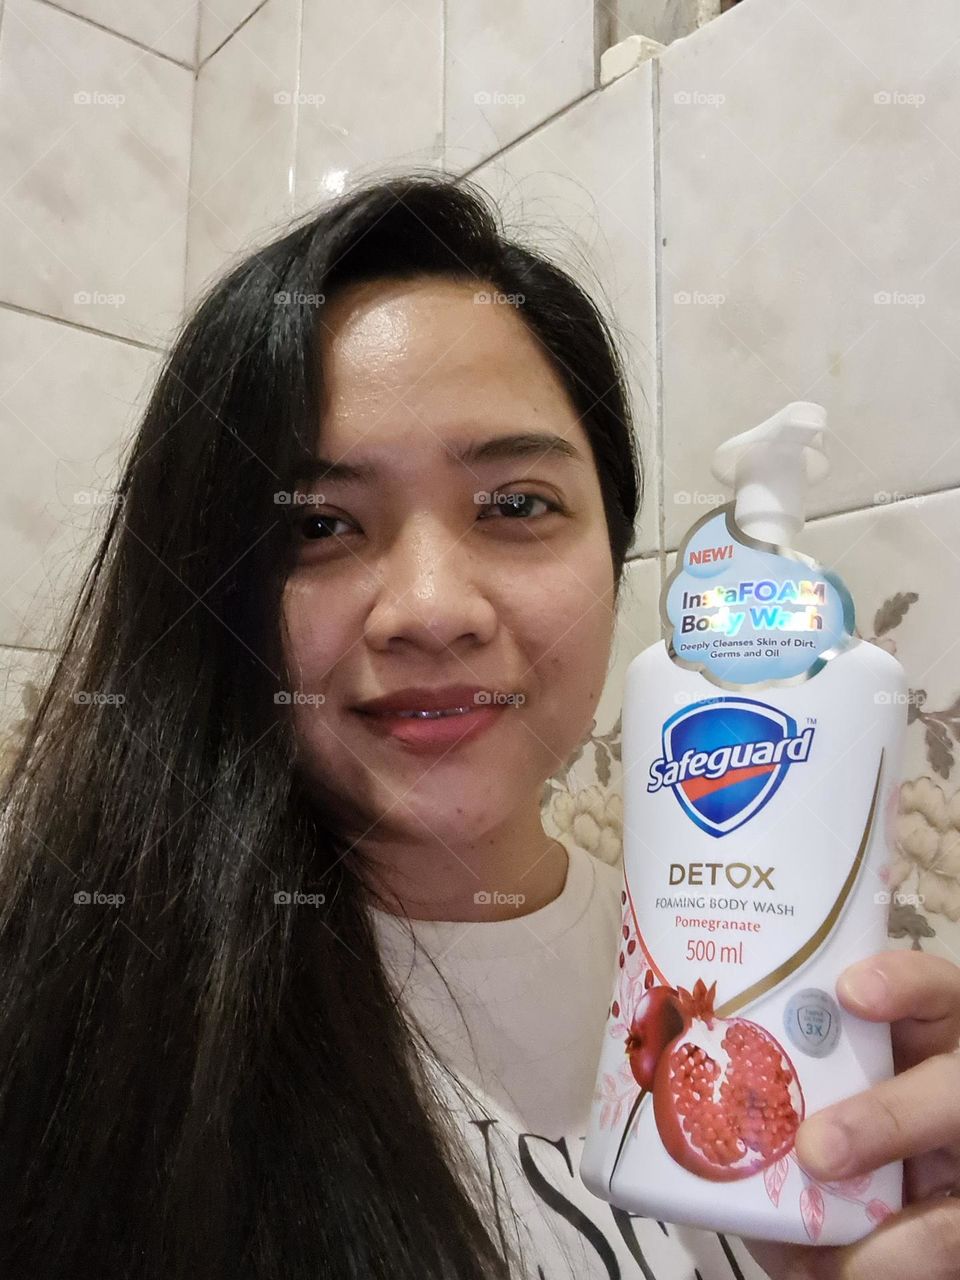 Safeguard Home Detox Body wash. Glad to have been included in this campaign and was one of the firsts to try this product.